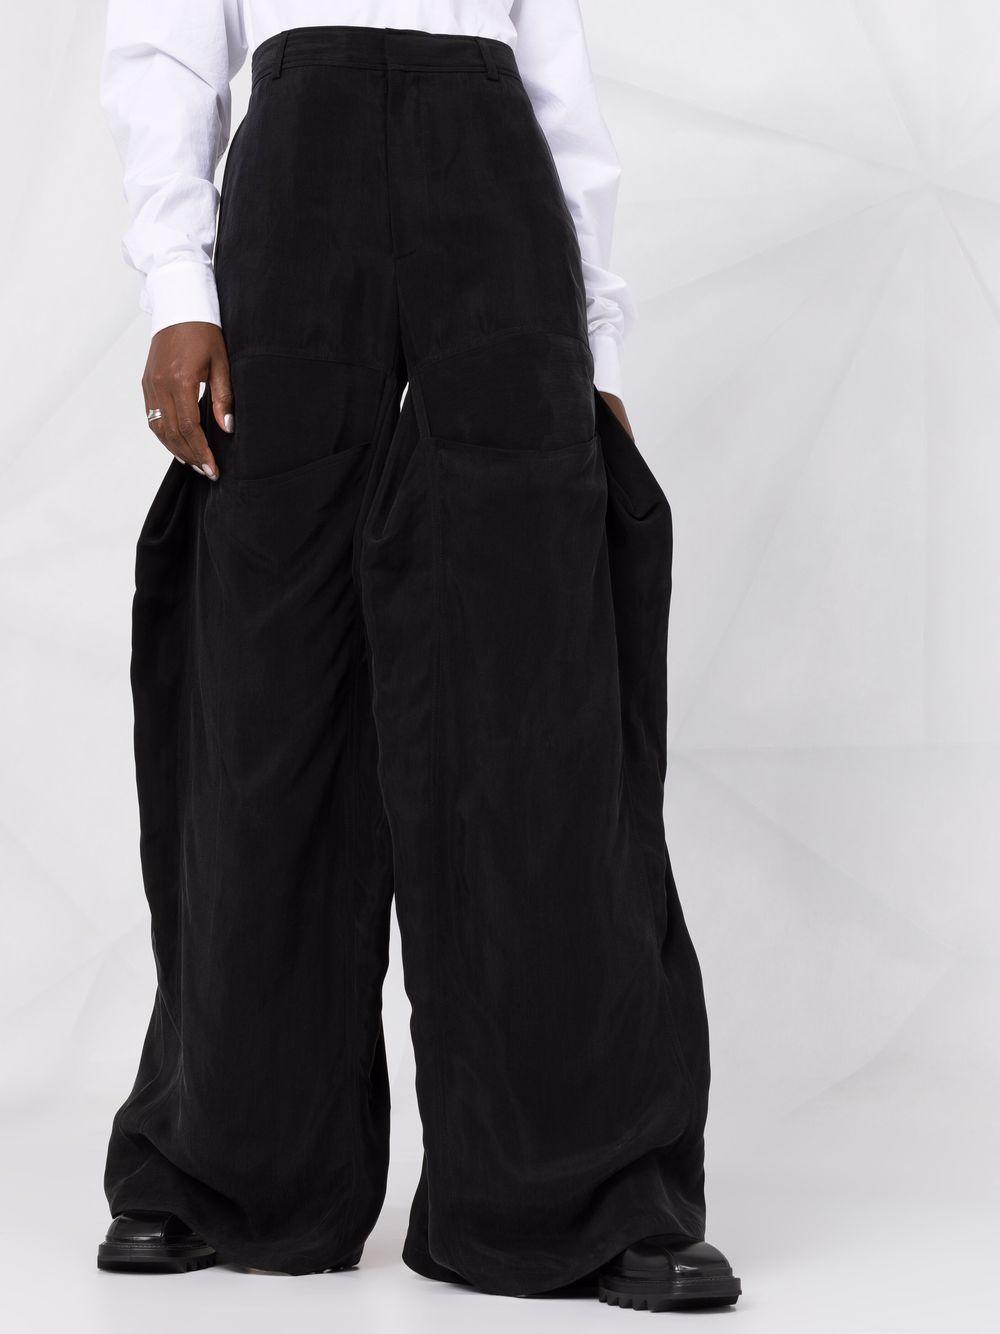 Womens Clothing Trousers Project Button Leg Trousers in Black Slacks and Chinos Cargo trousers Y 